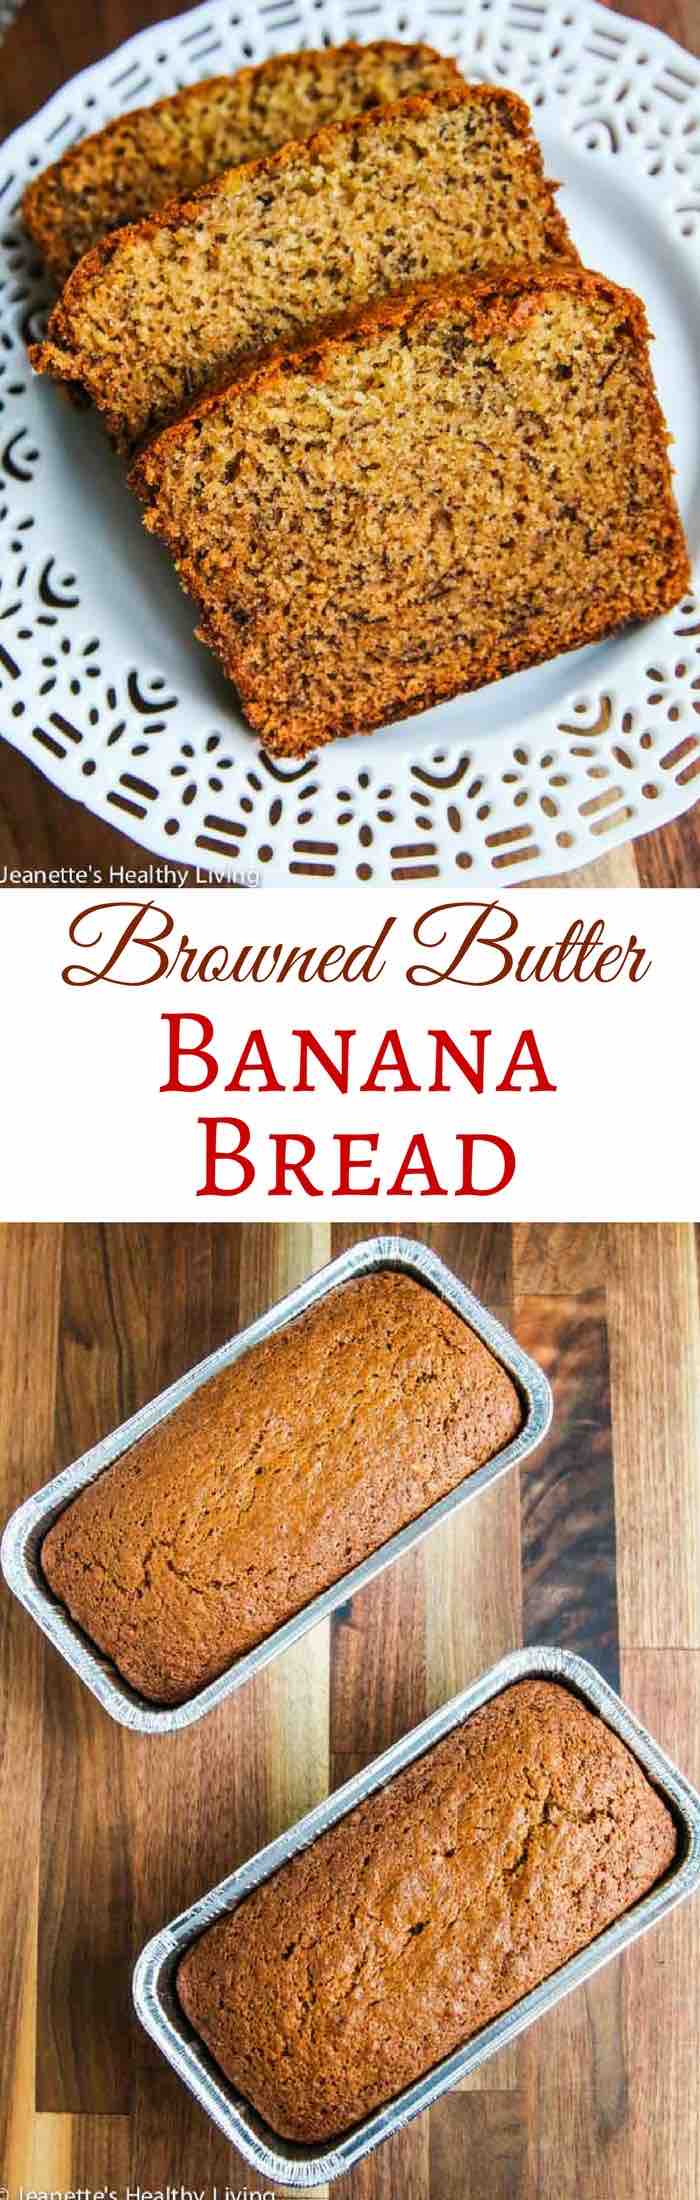 Browned Butter Banana Bread - decadently delicious, made a little healthier with whole wheat pastry flour - great for gifts and special occasions